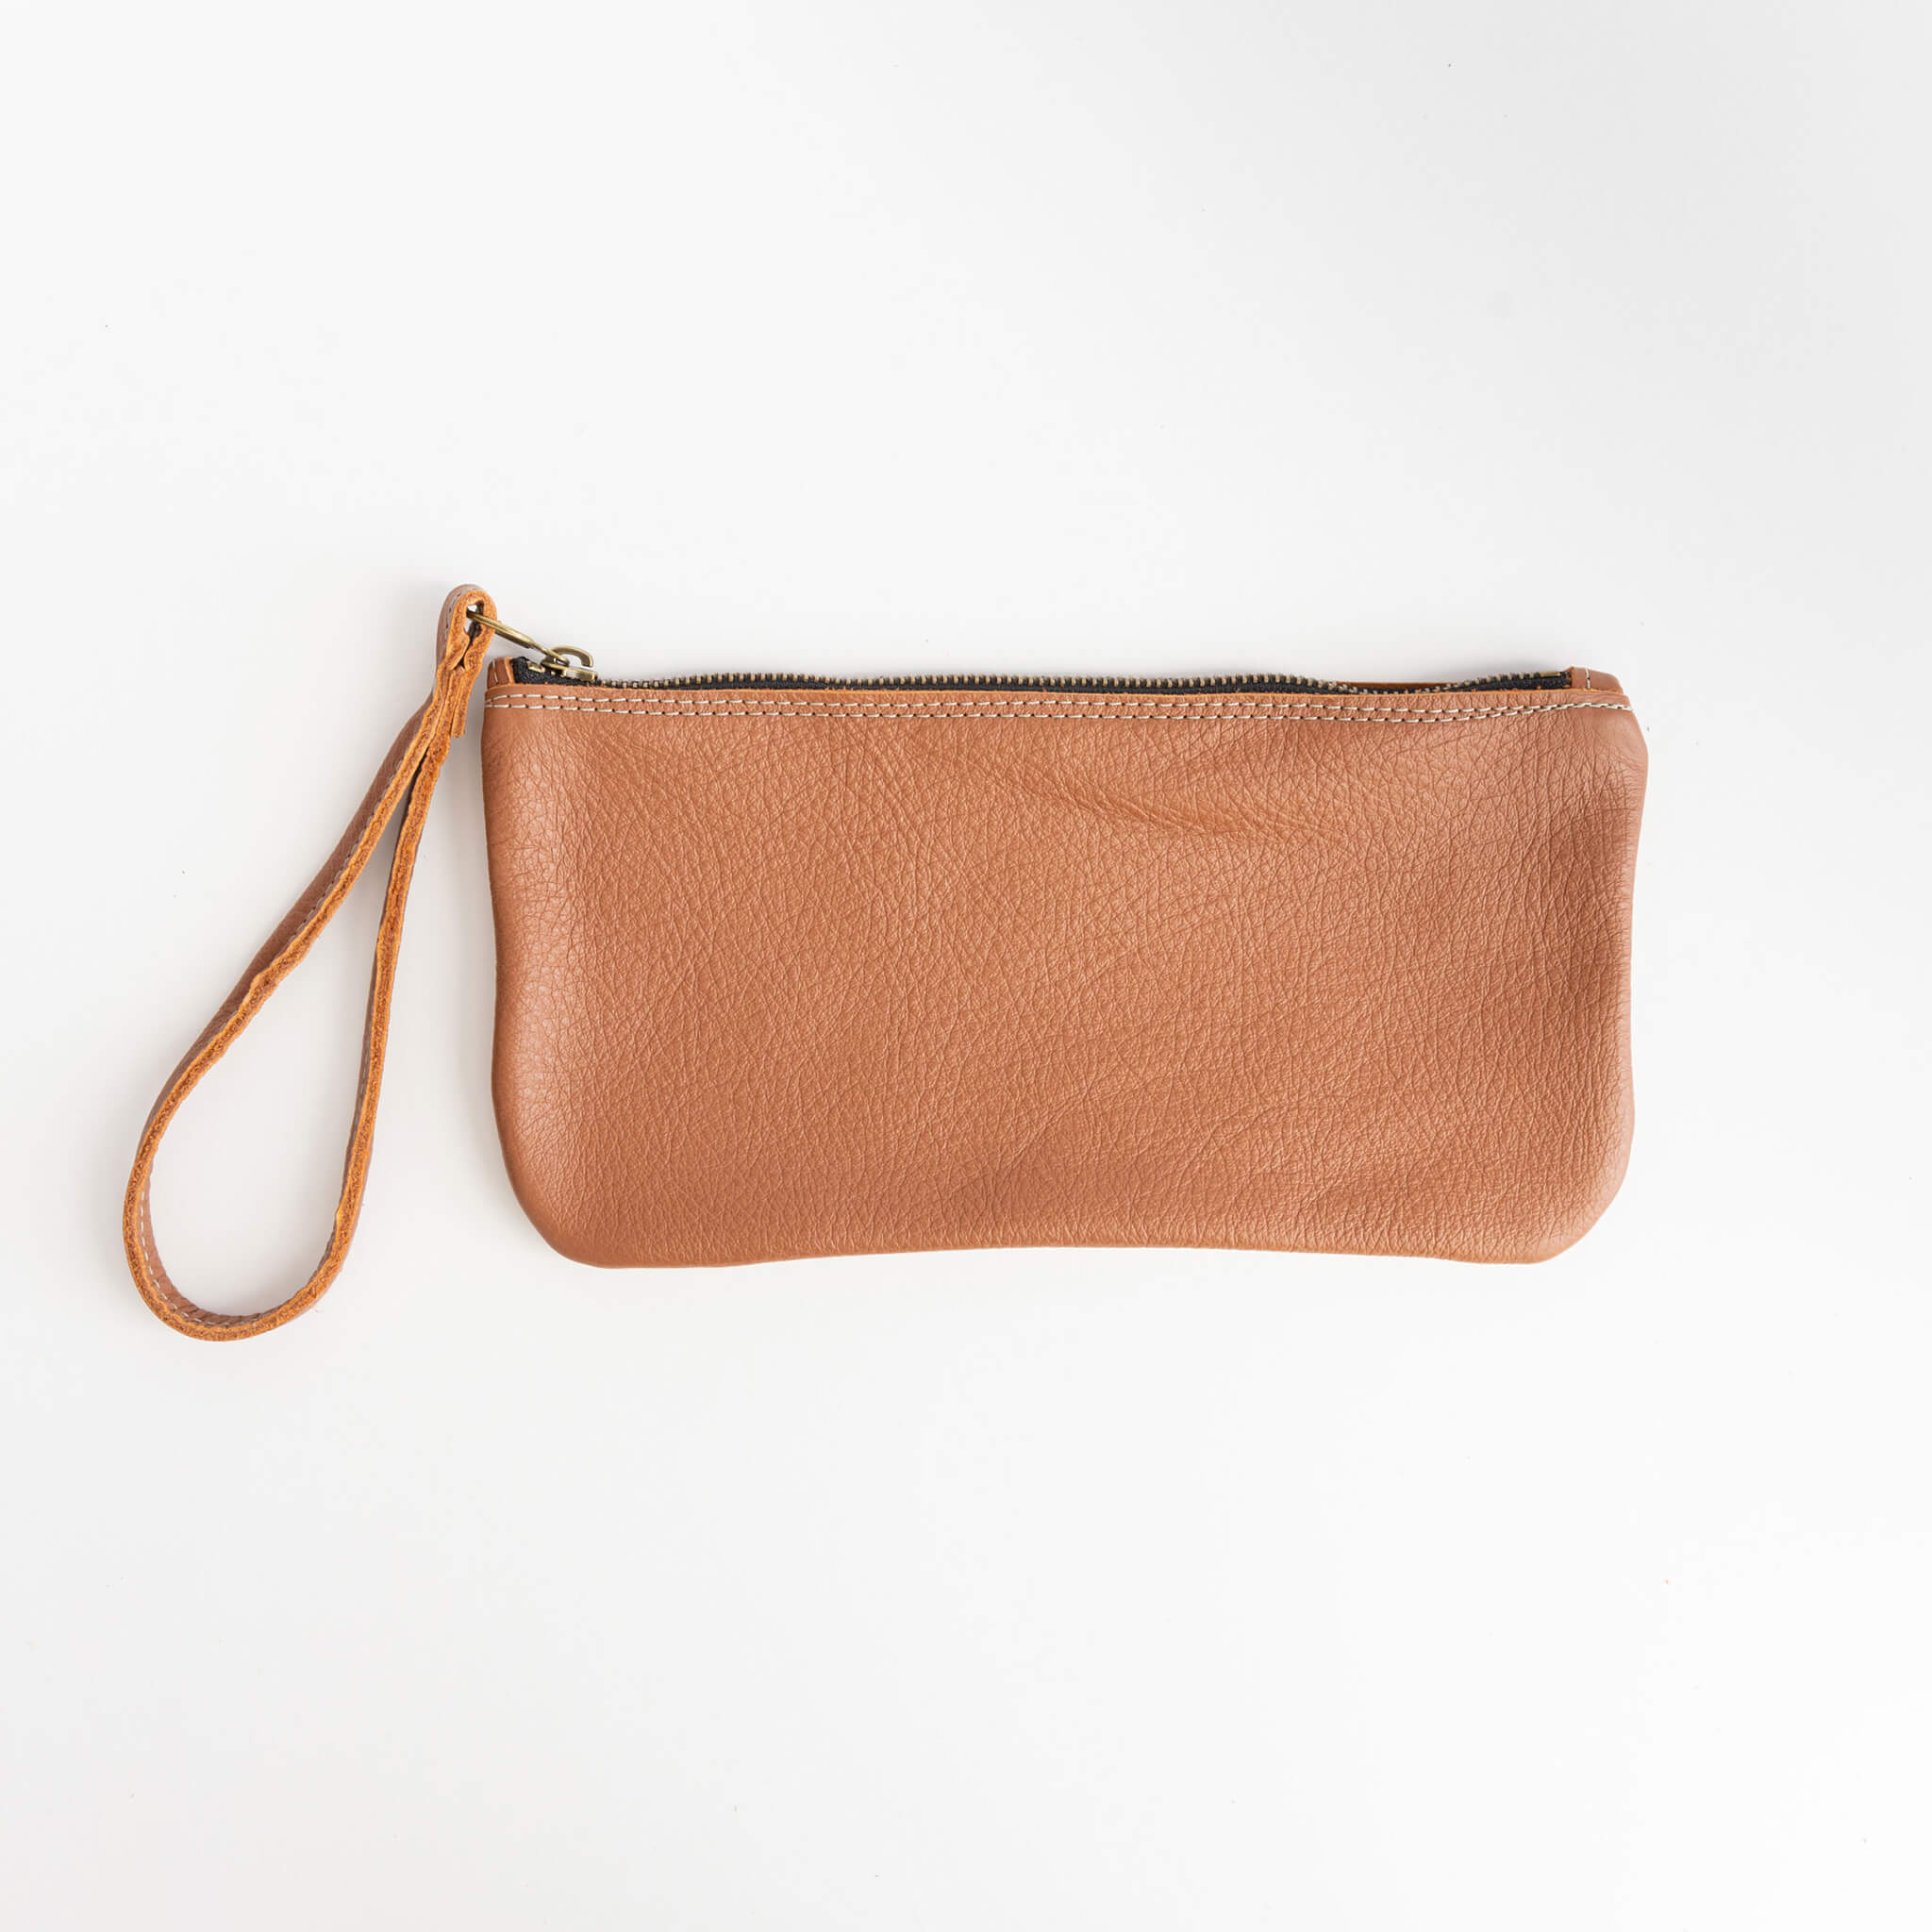 francis clutch - wristlet - handmade leather - tawny front view